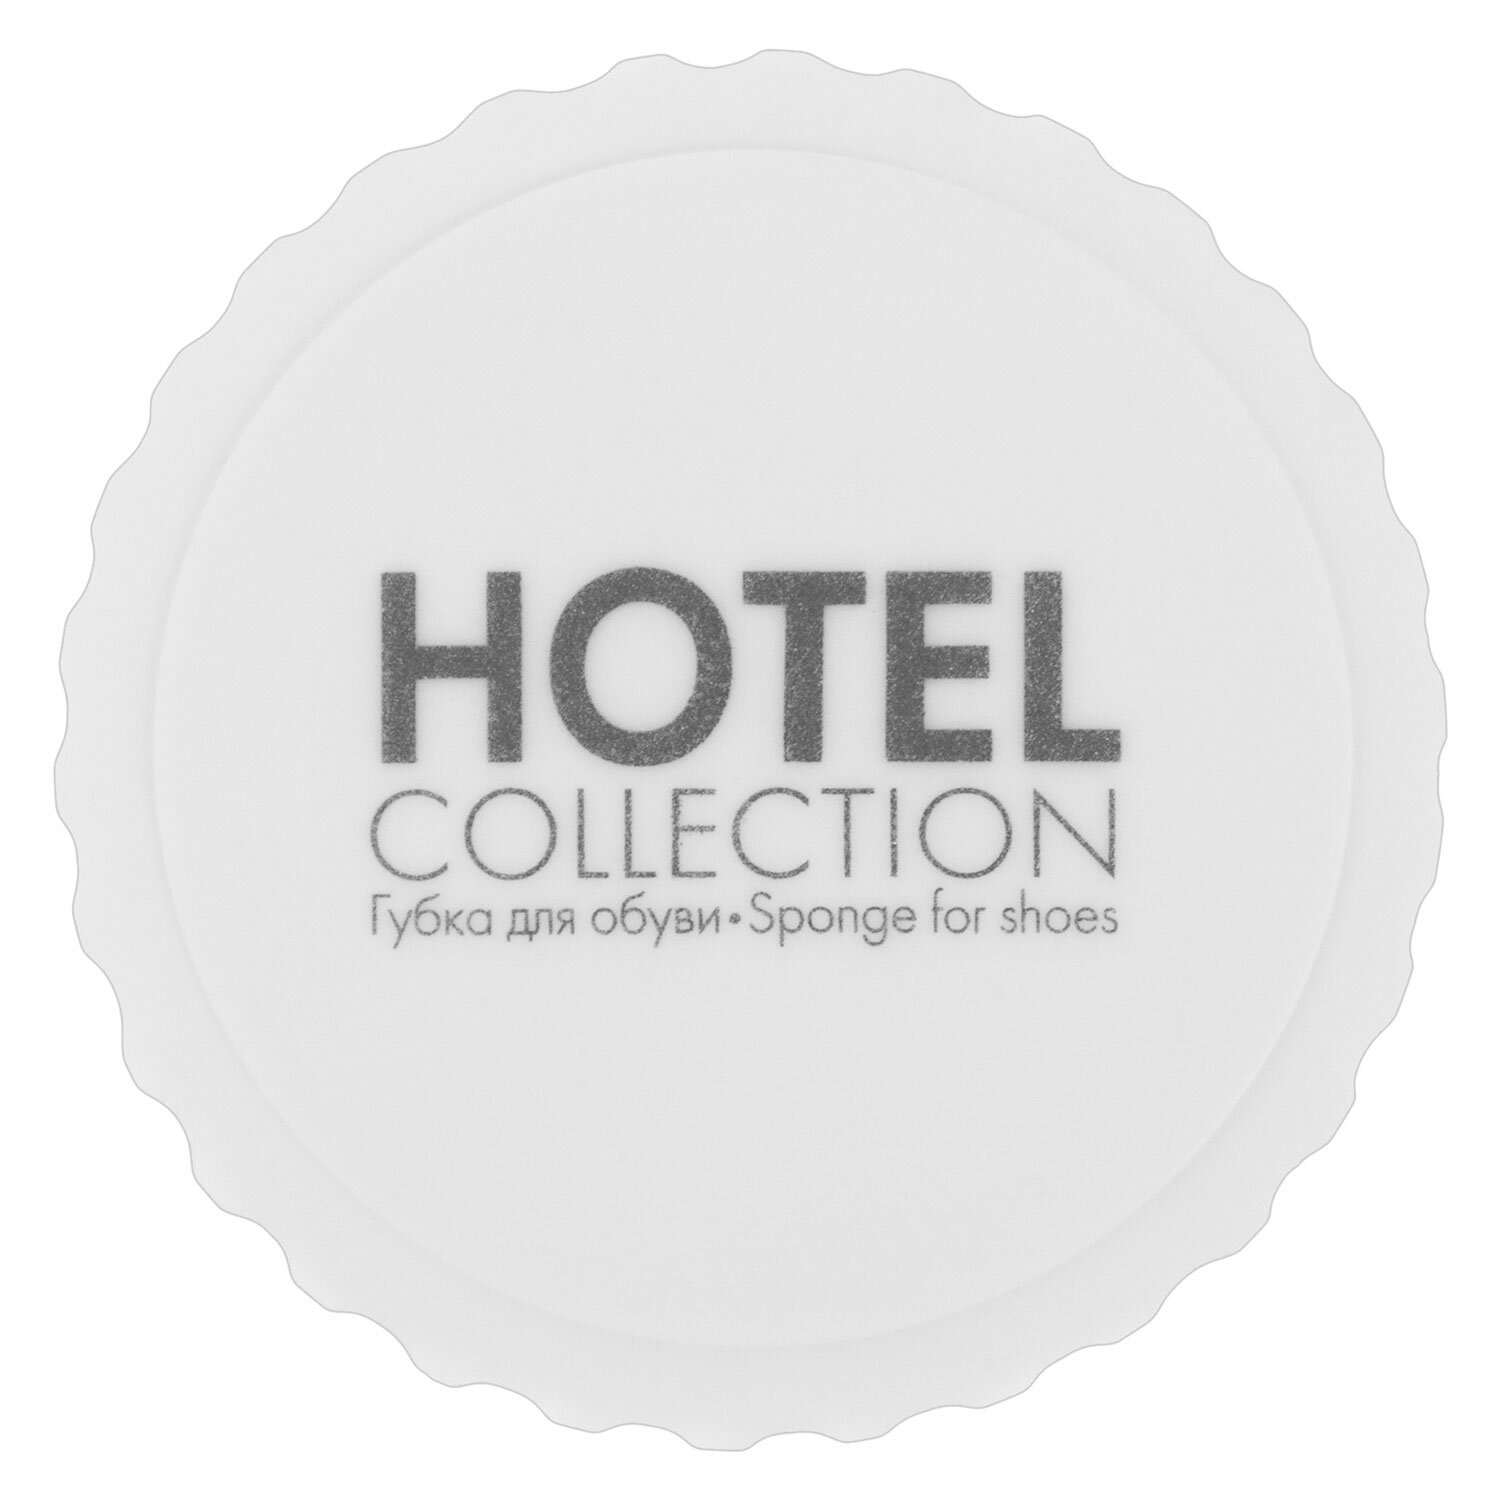  HOTEL COLLECTION 2000321